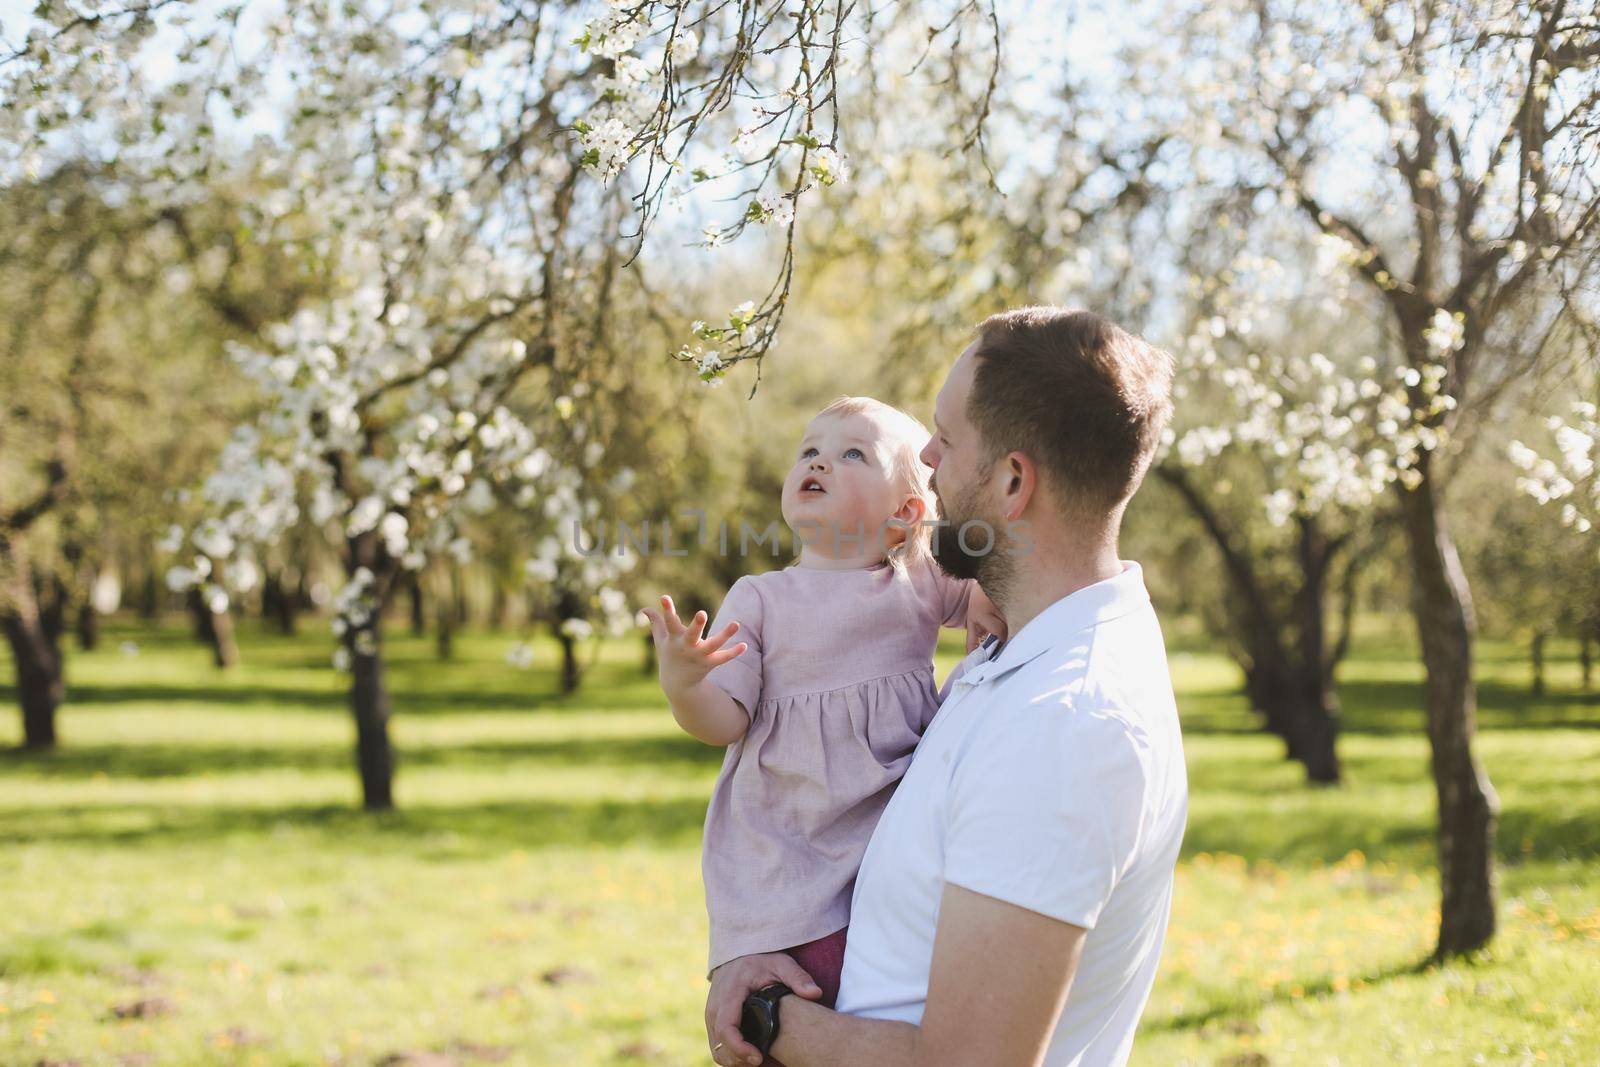 father and his adorable toddler daughter having fun in blossoming cherry garden on beautiful spring day.